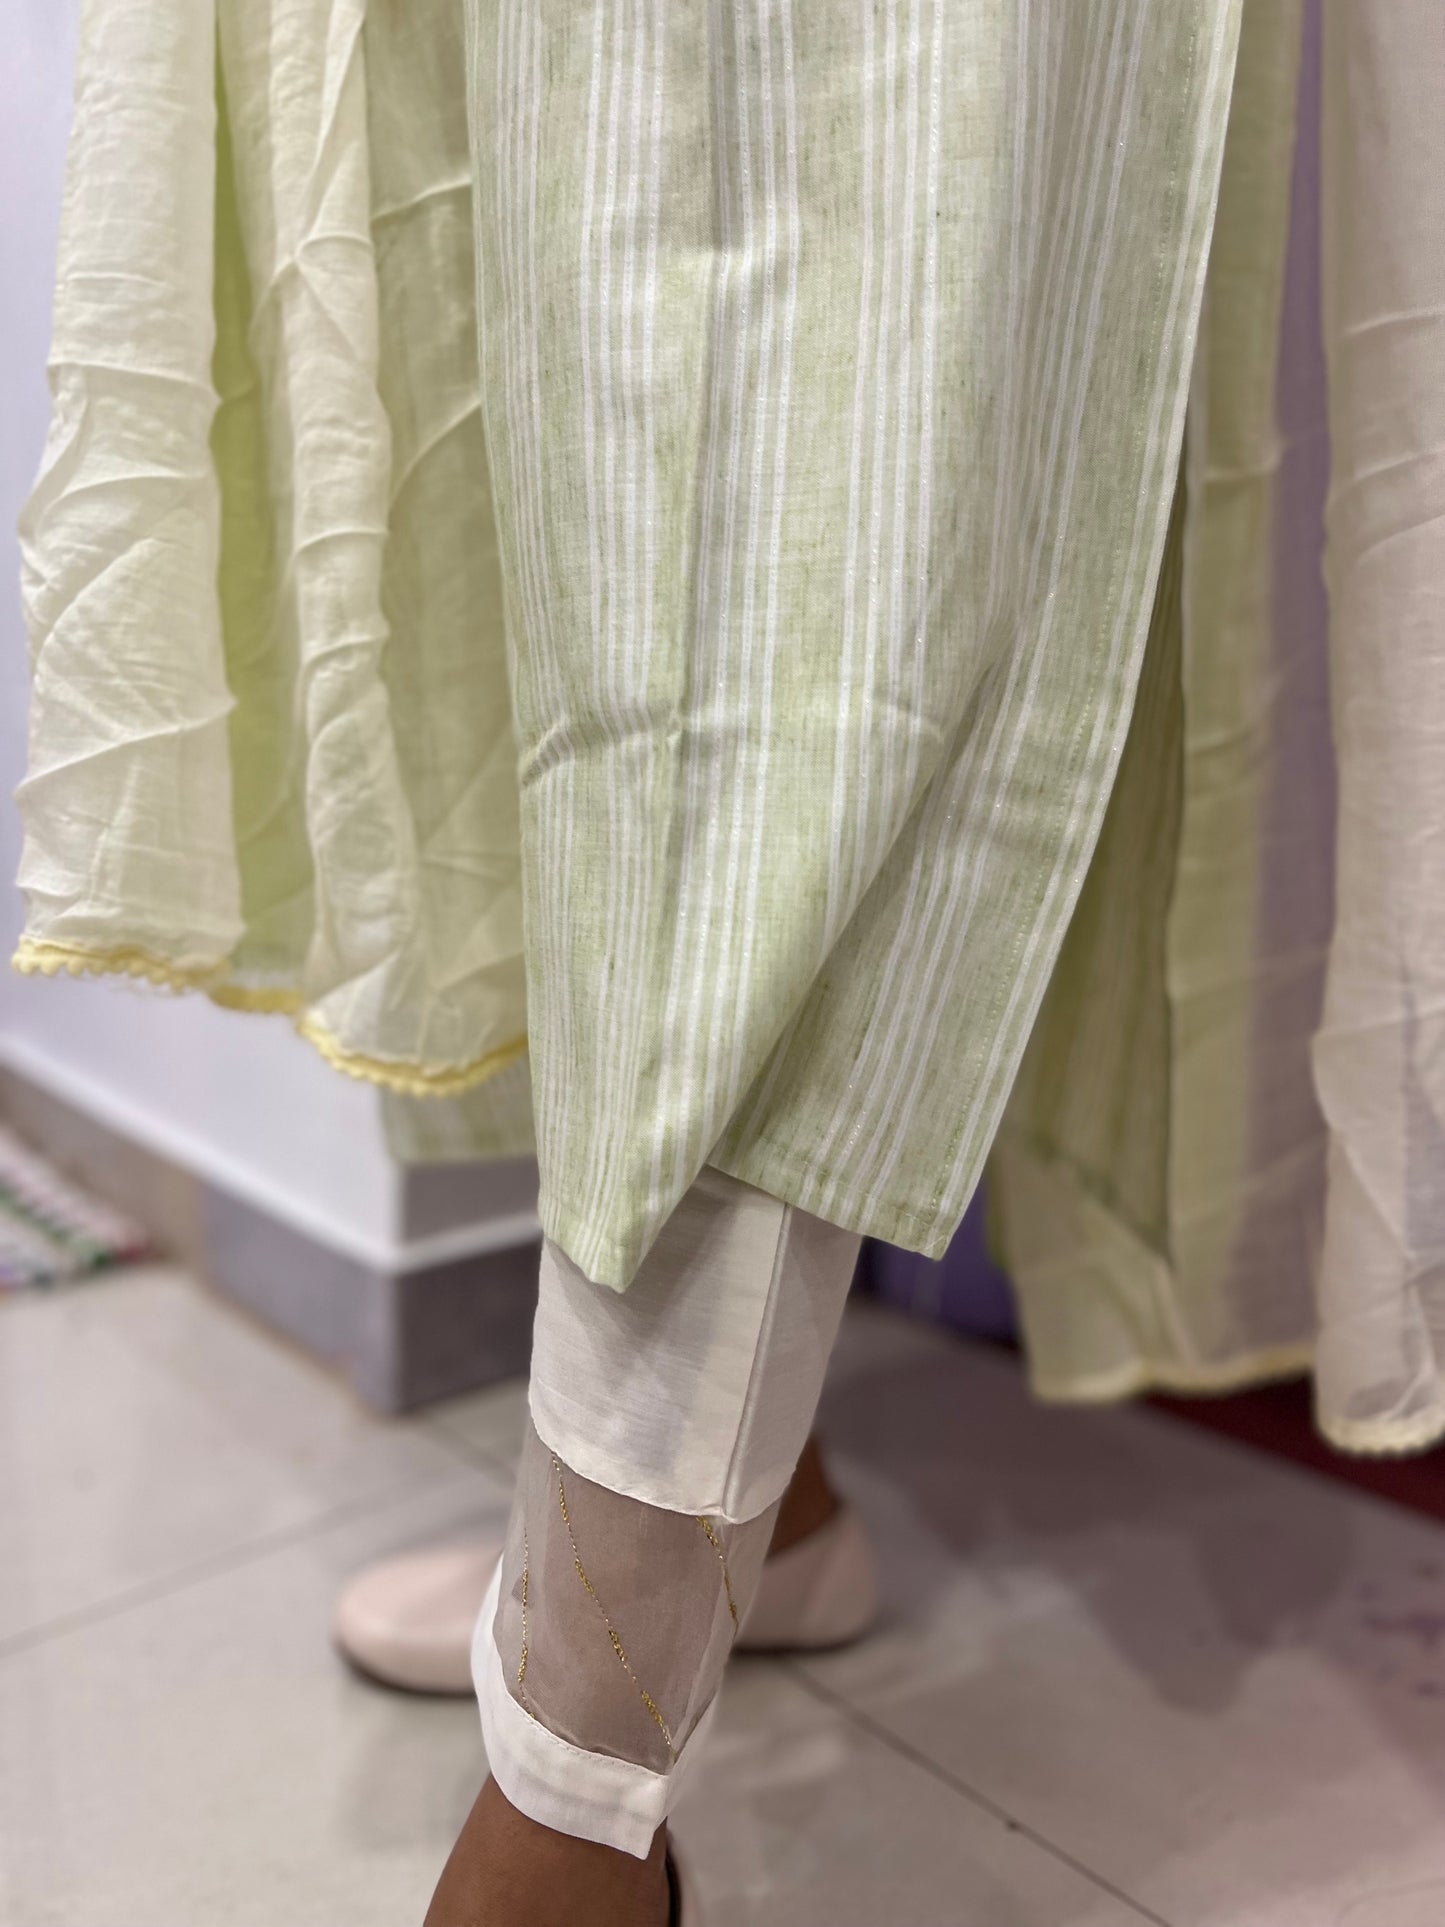 Southloom Stitched Cotton Salwar Set in Light Green Colour with Stripes work and Bead Thread work in Yoke Portion